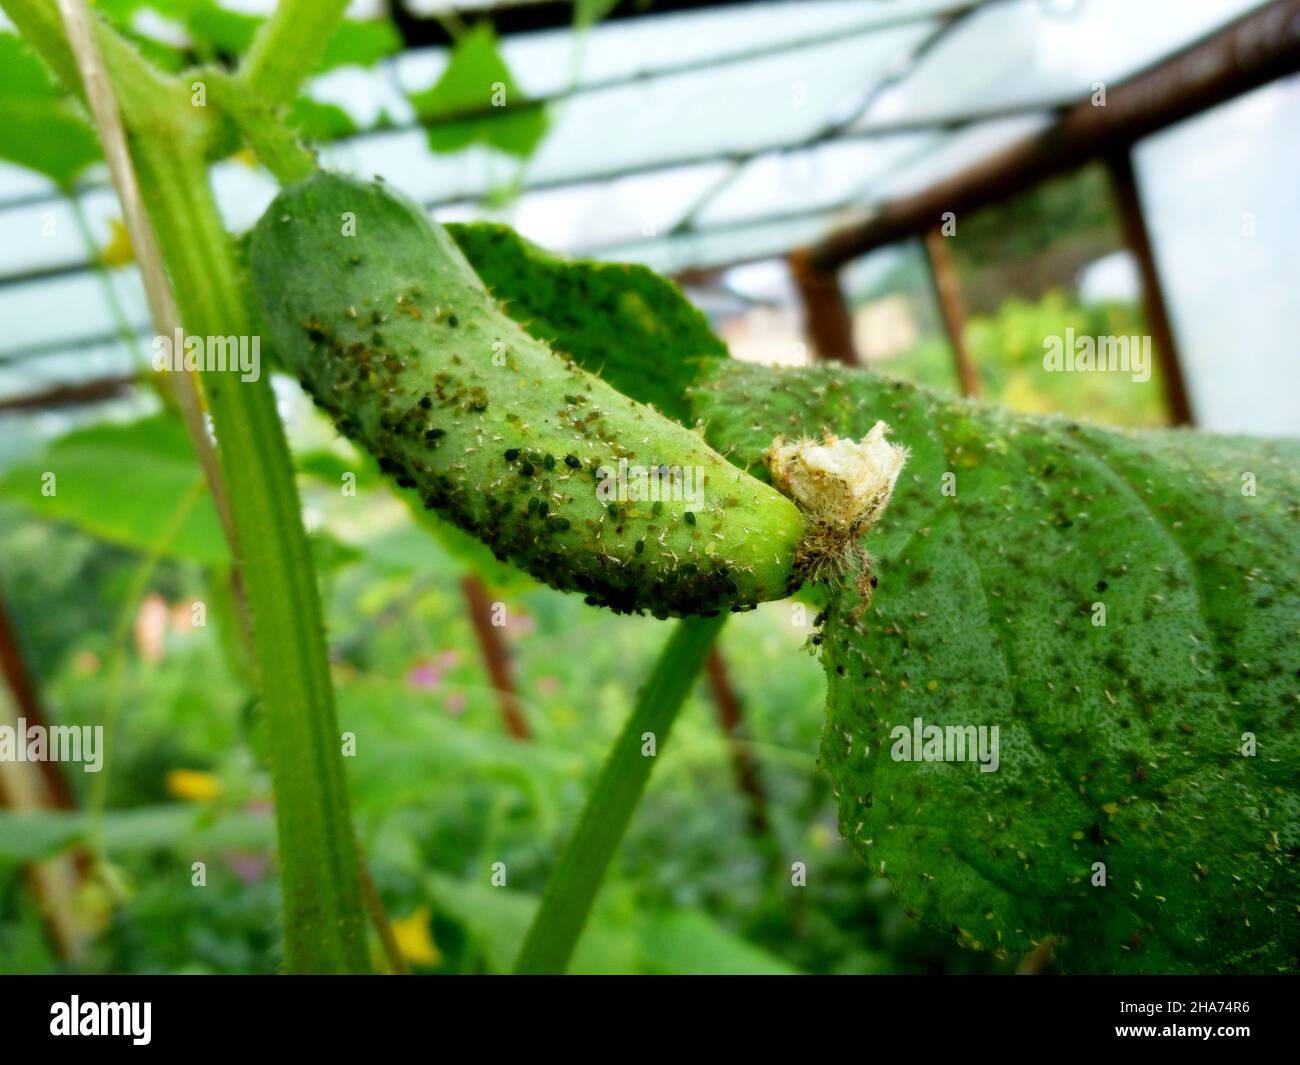 Insect pests, aphids, on the leaves and fruits of plants. Cucumber attacked by harmful insects Stock Photo